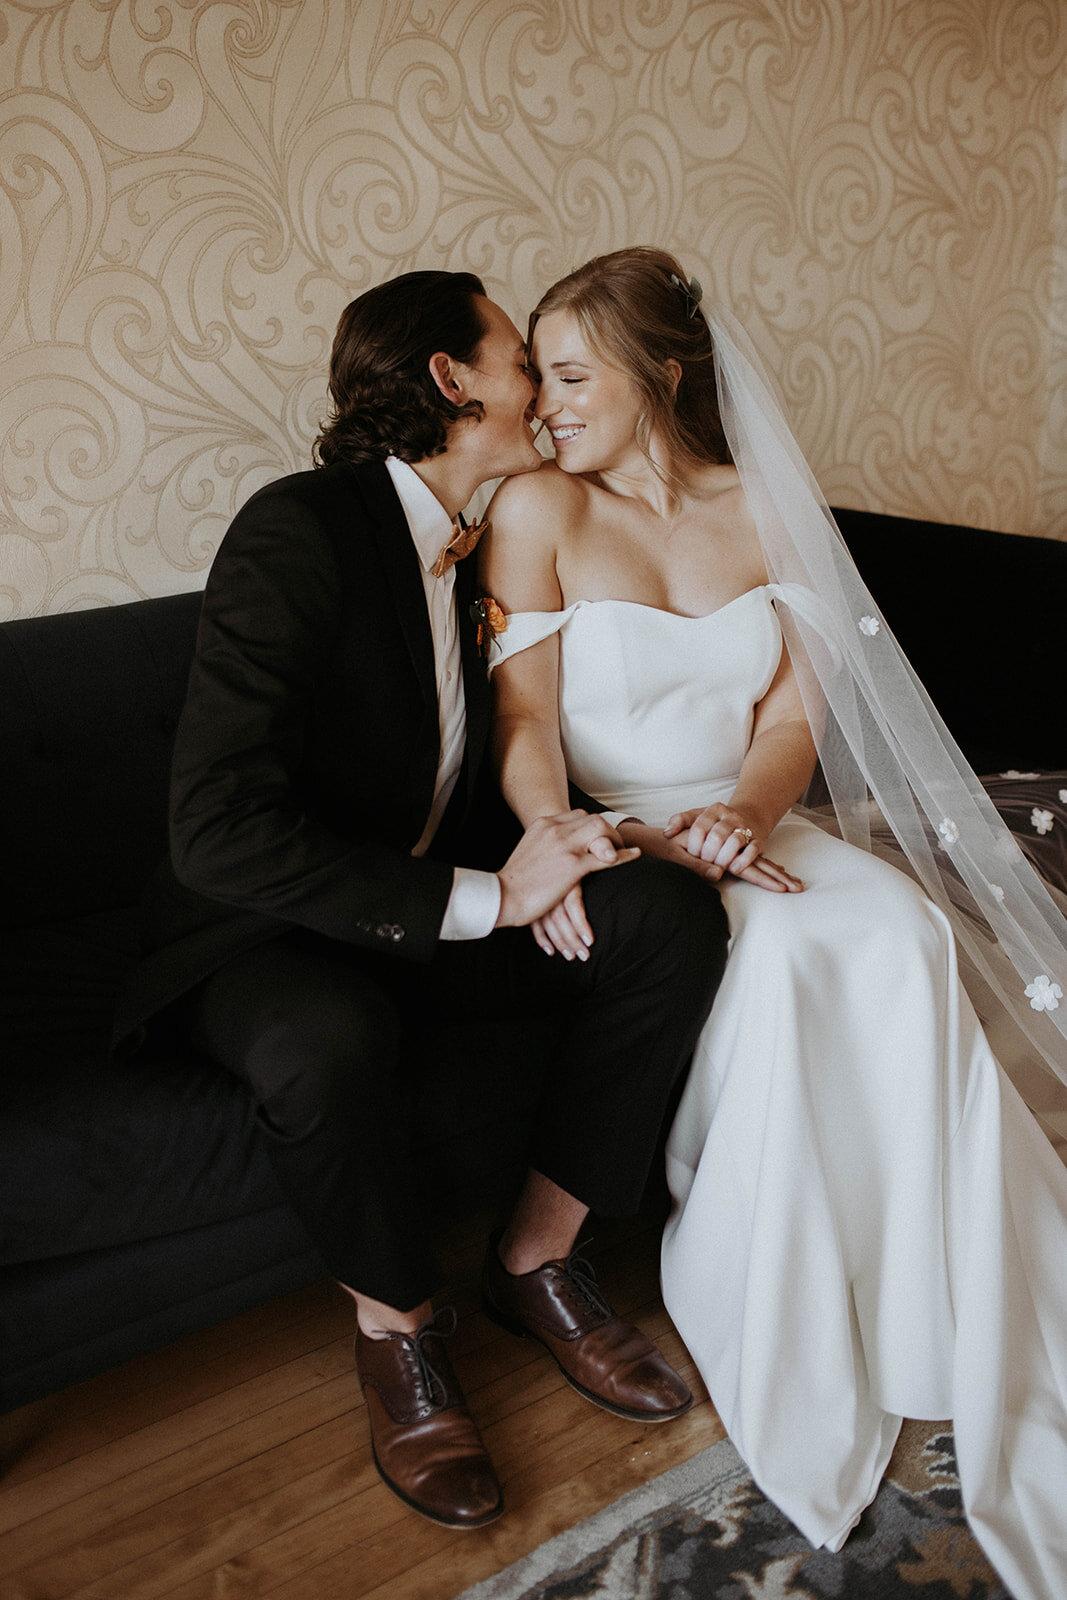 Fall Styled Wedding Shoot at The Haight captured by Anissa D. Photography